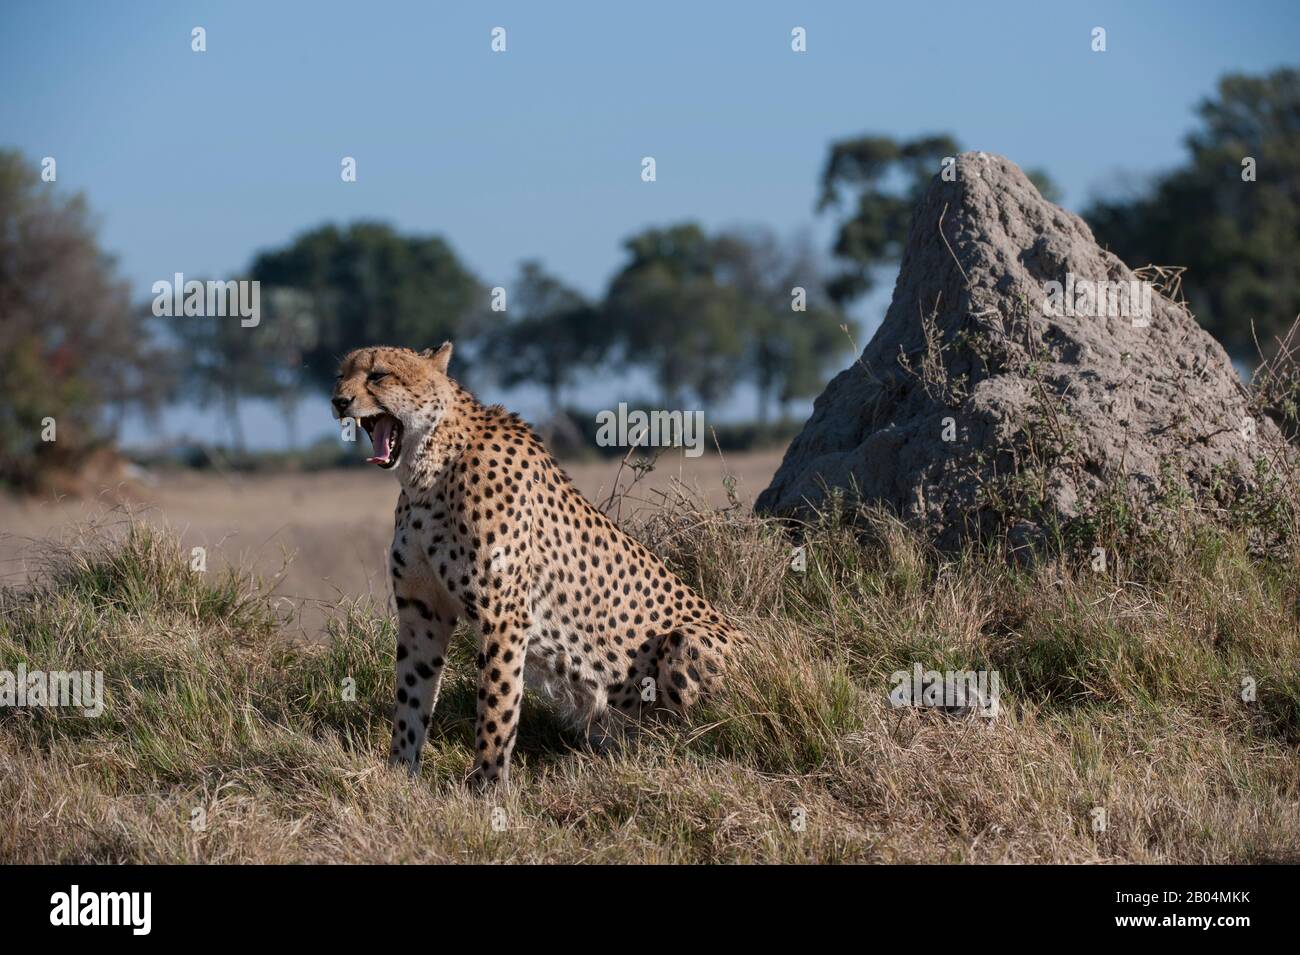 A Cheetah (Acinonyx jubatus) in front of termite hill in the Chitabe area of the Okavango Delta in the northern part of Botswana. Stock Photo